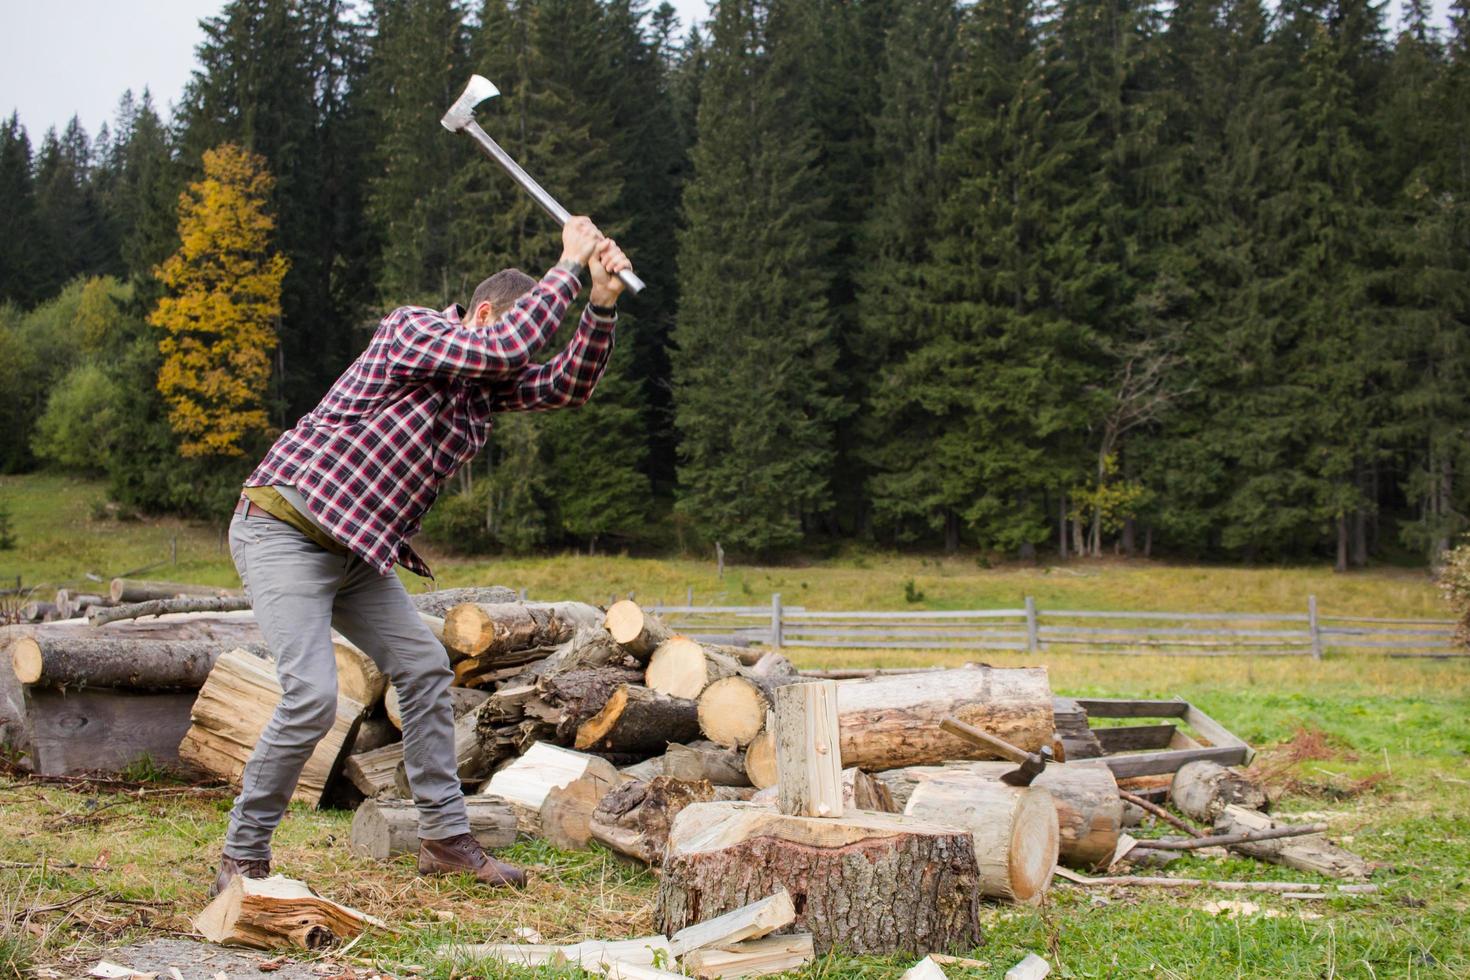 yong male in forest choping wood with steel axe, country landscape with lumberjack photo